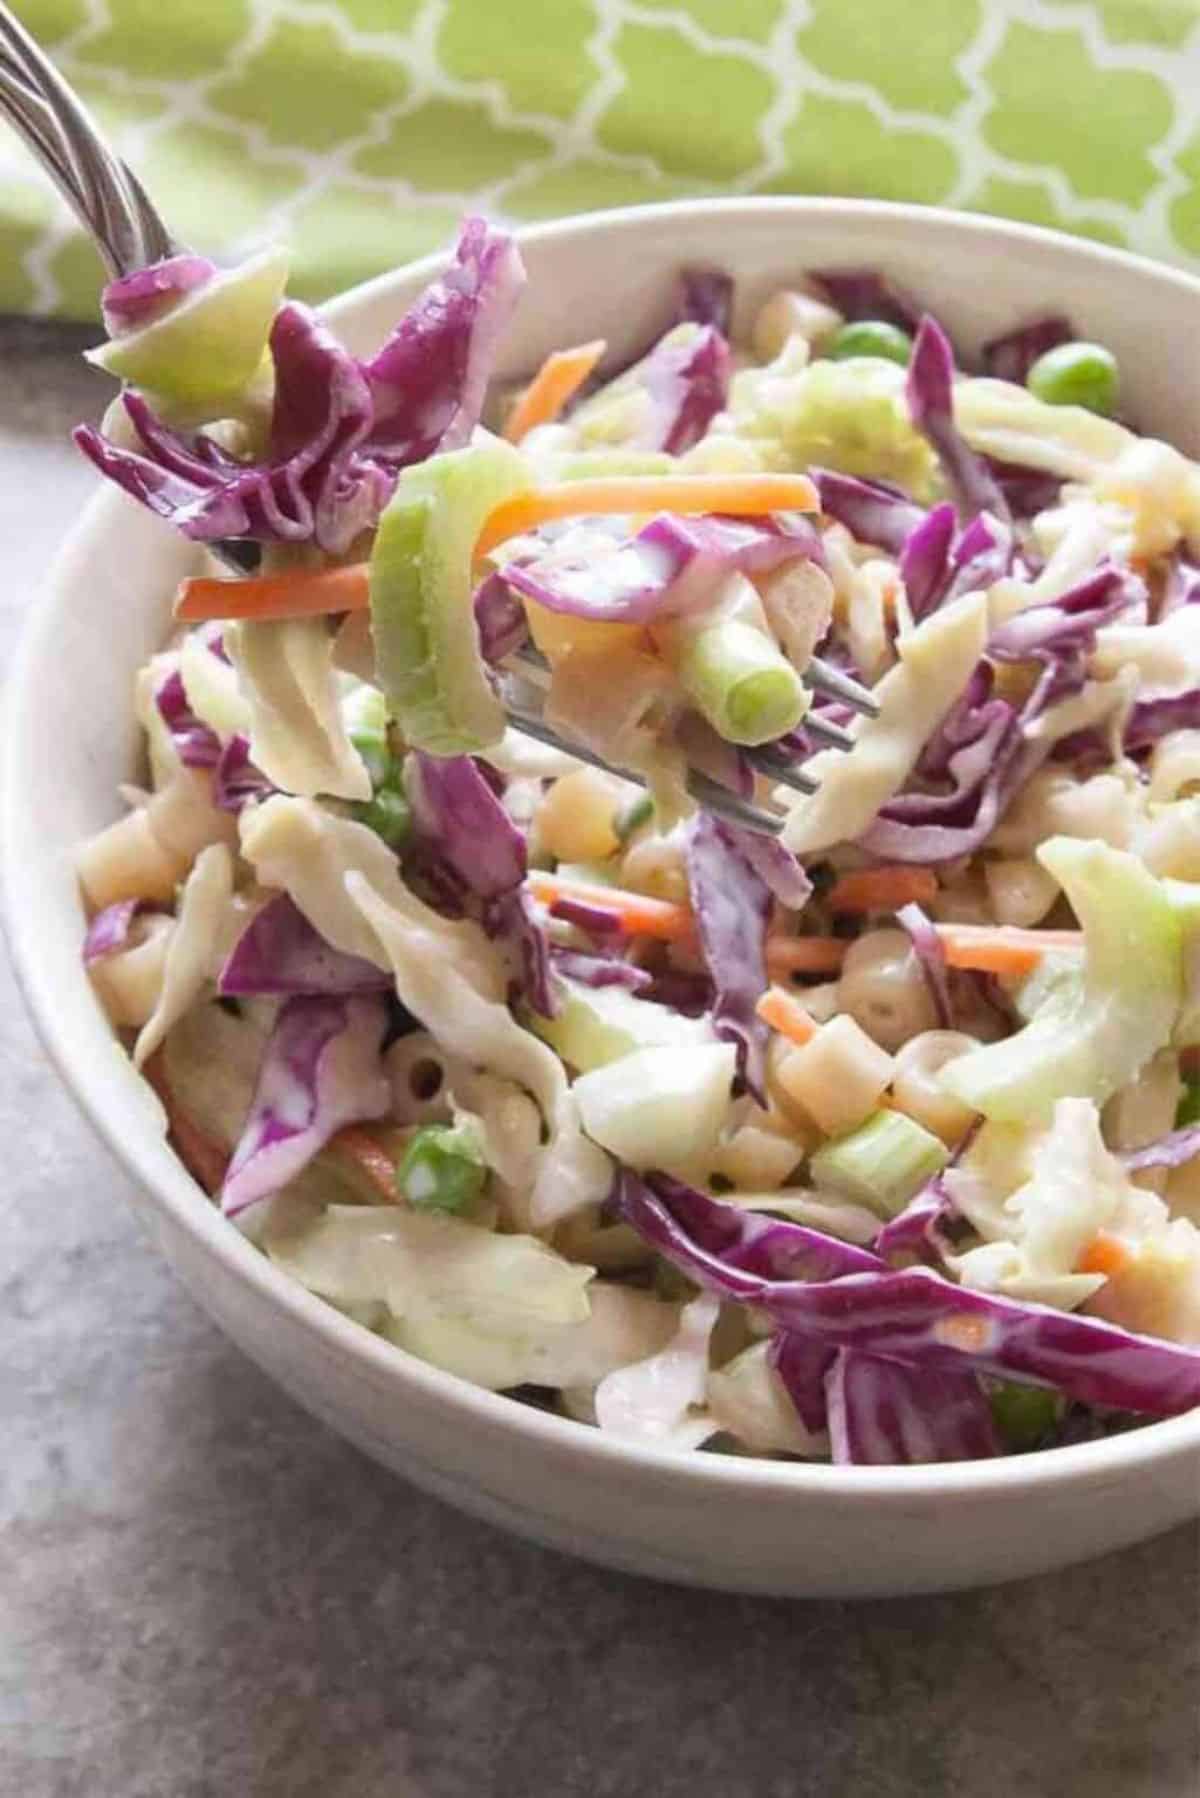 Tasty Macaroni Coleslaw Salad in a white bowl with a fork.